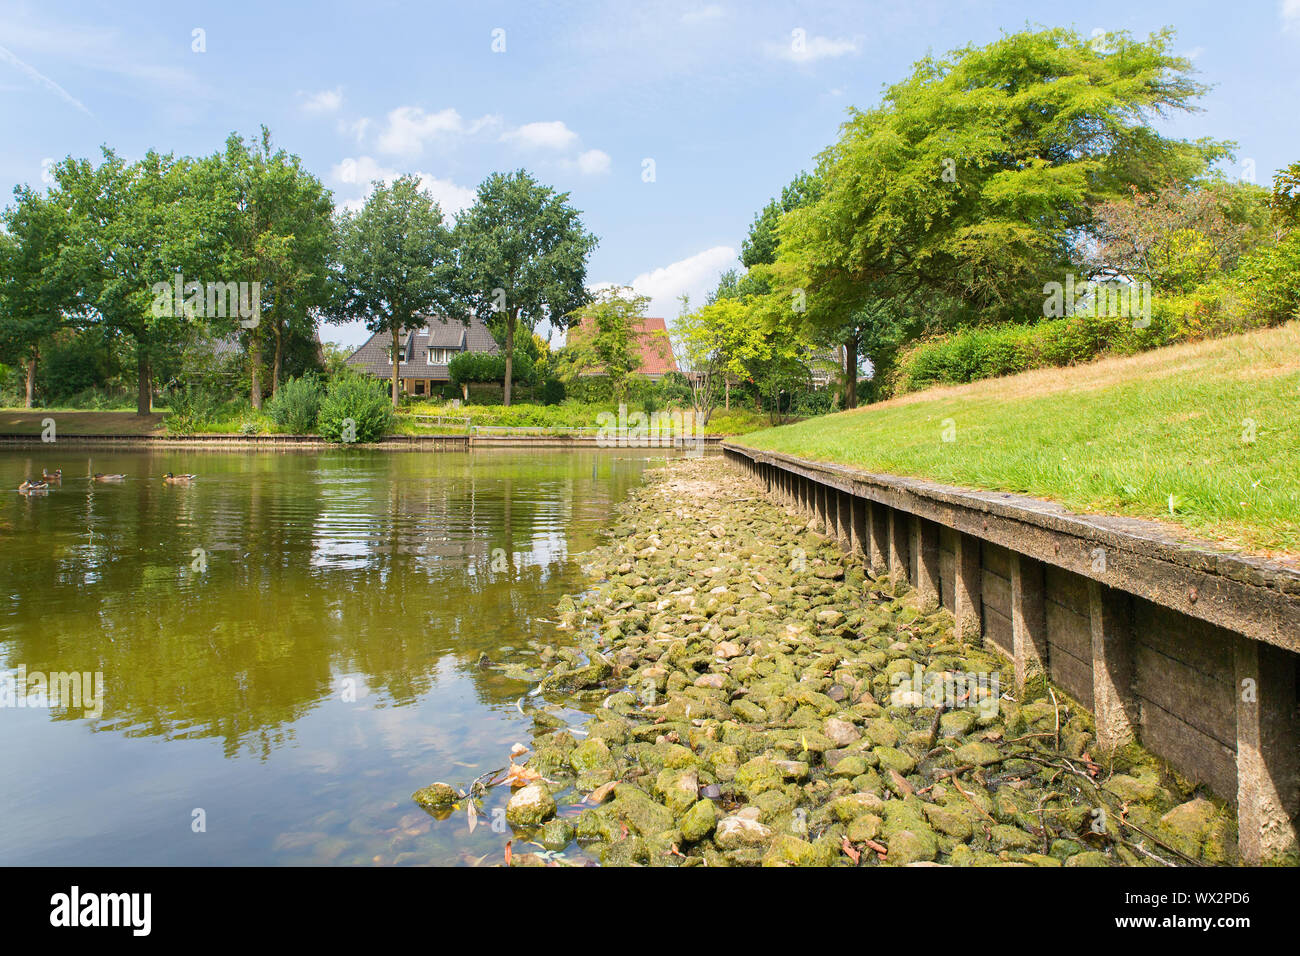 Pond in residential area with water shortage Stock Photo